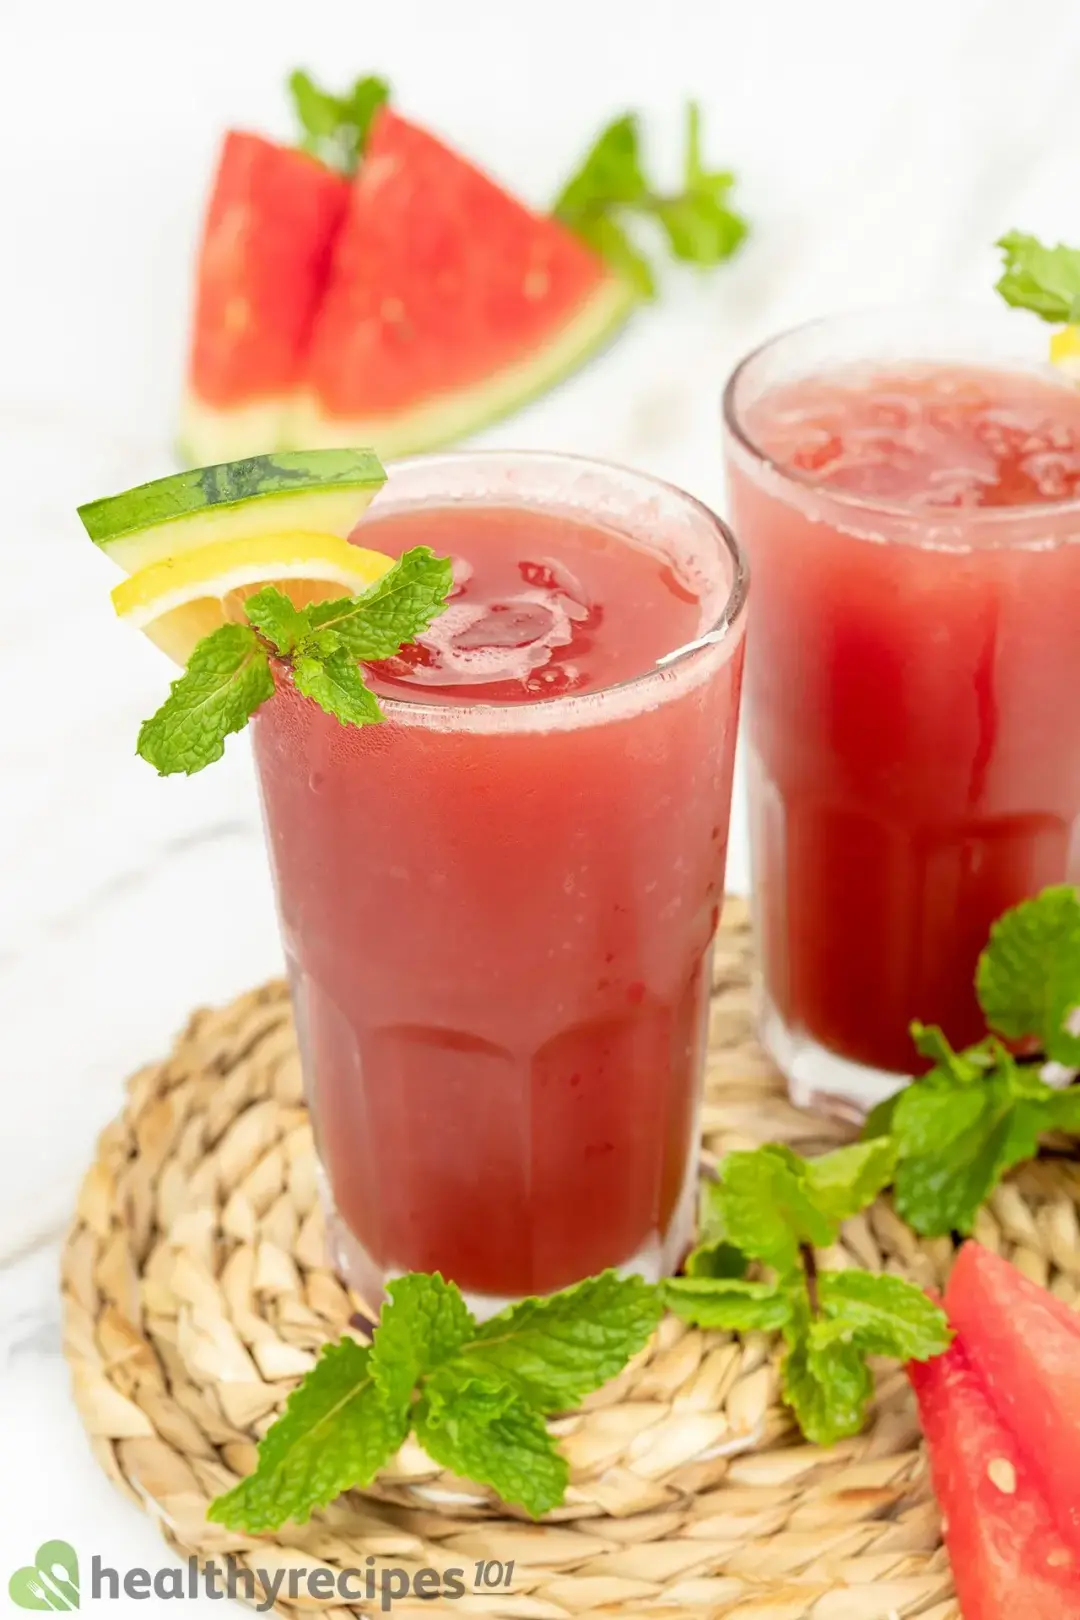 Two dark red glasses of watermelon cucumber juice placed on a woven plate surrounded by spearmint leaves and a few watermelon slices